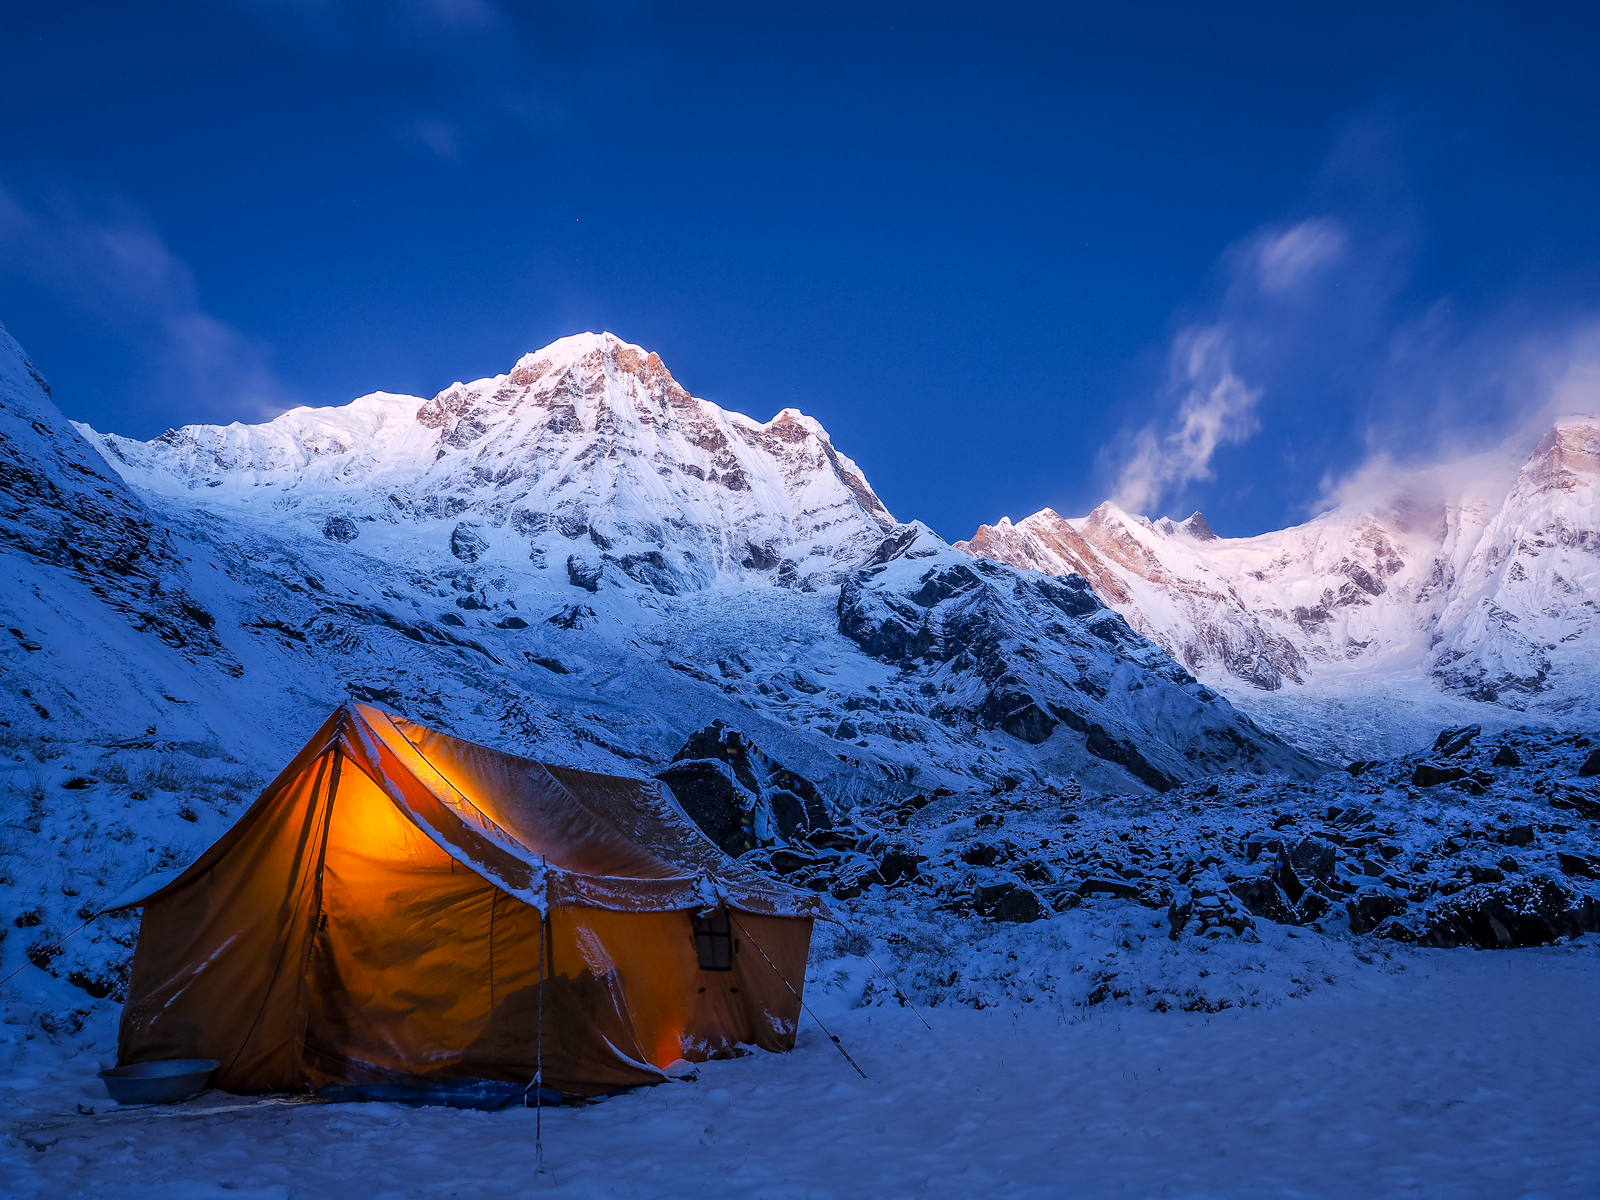 Tent in the mountains on a winter night with bright moon, Annapu